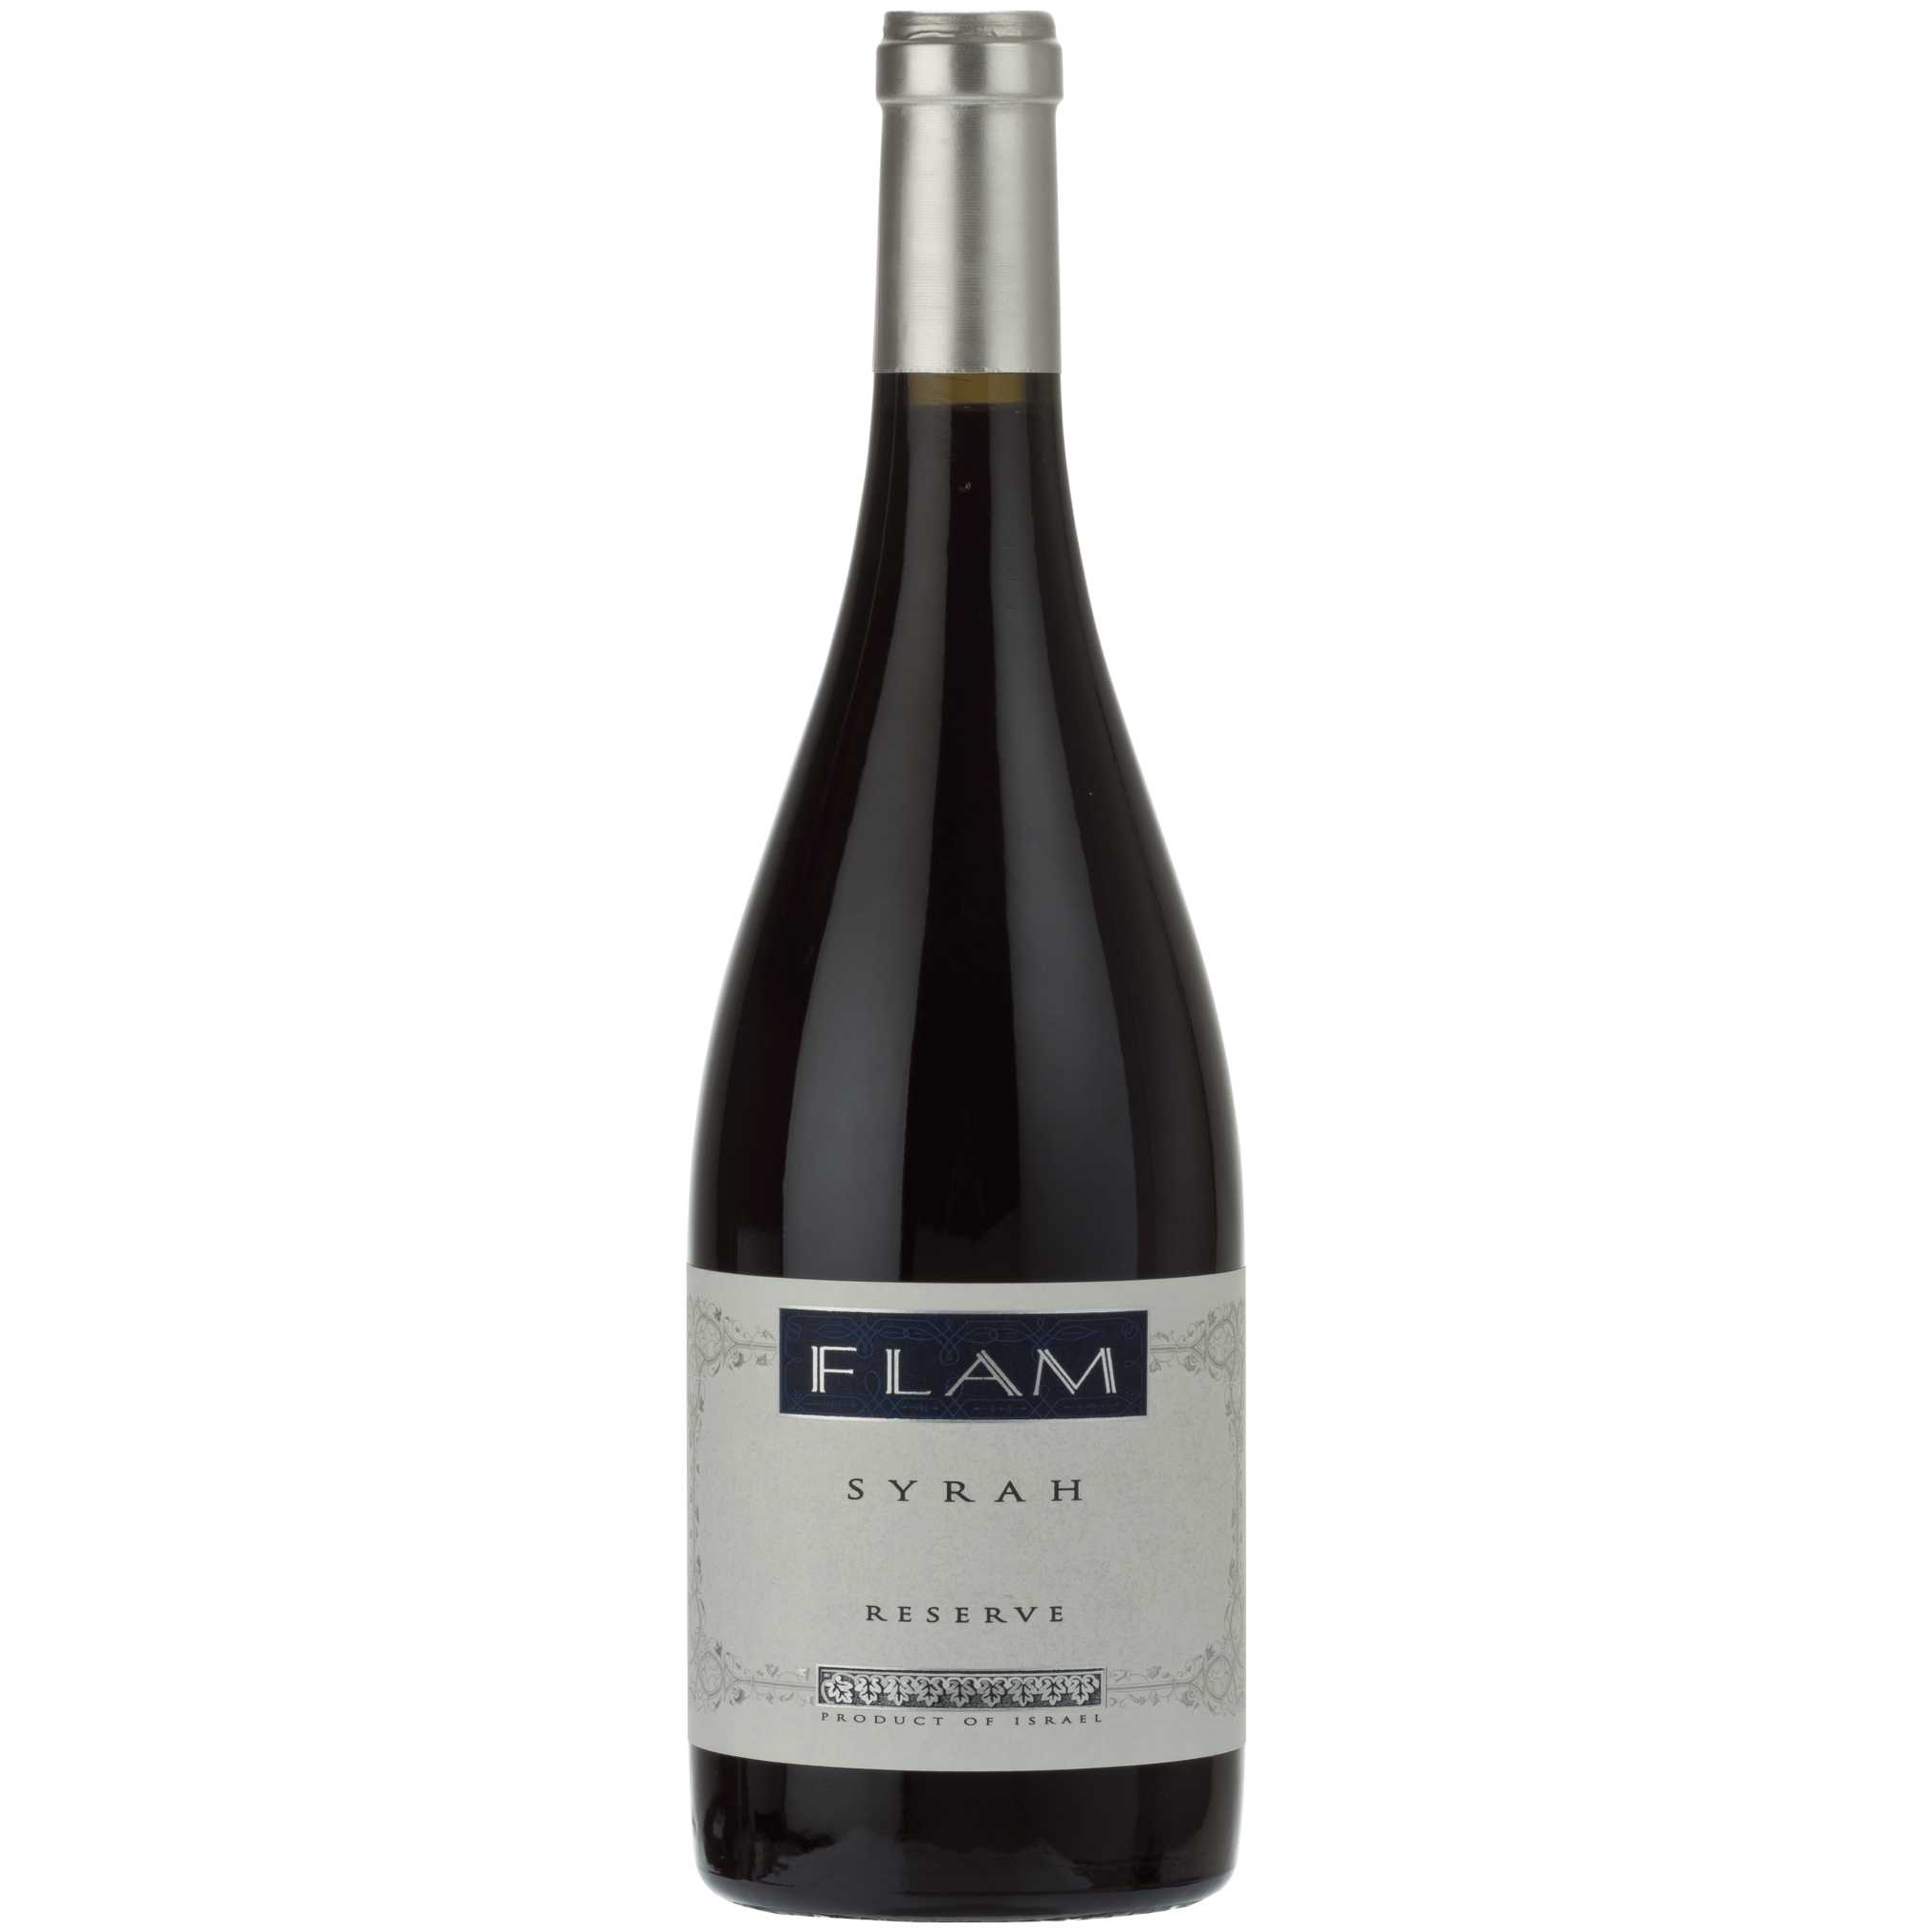 Flam Reserve Syrah - A Kosher Wine From Israel